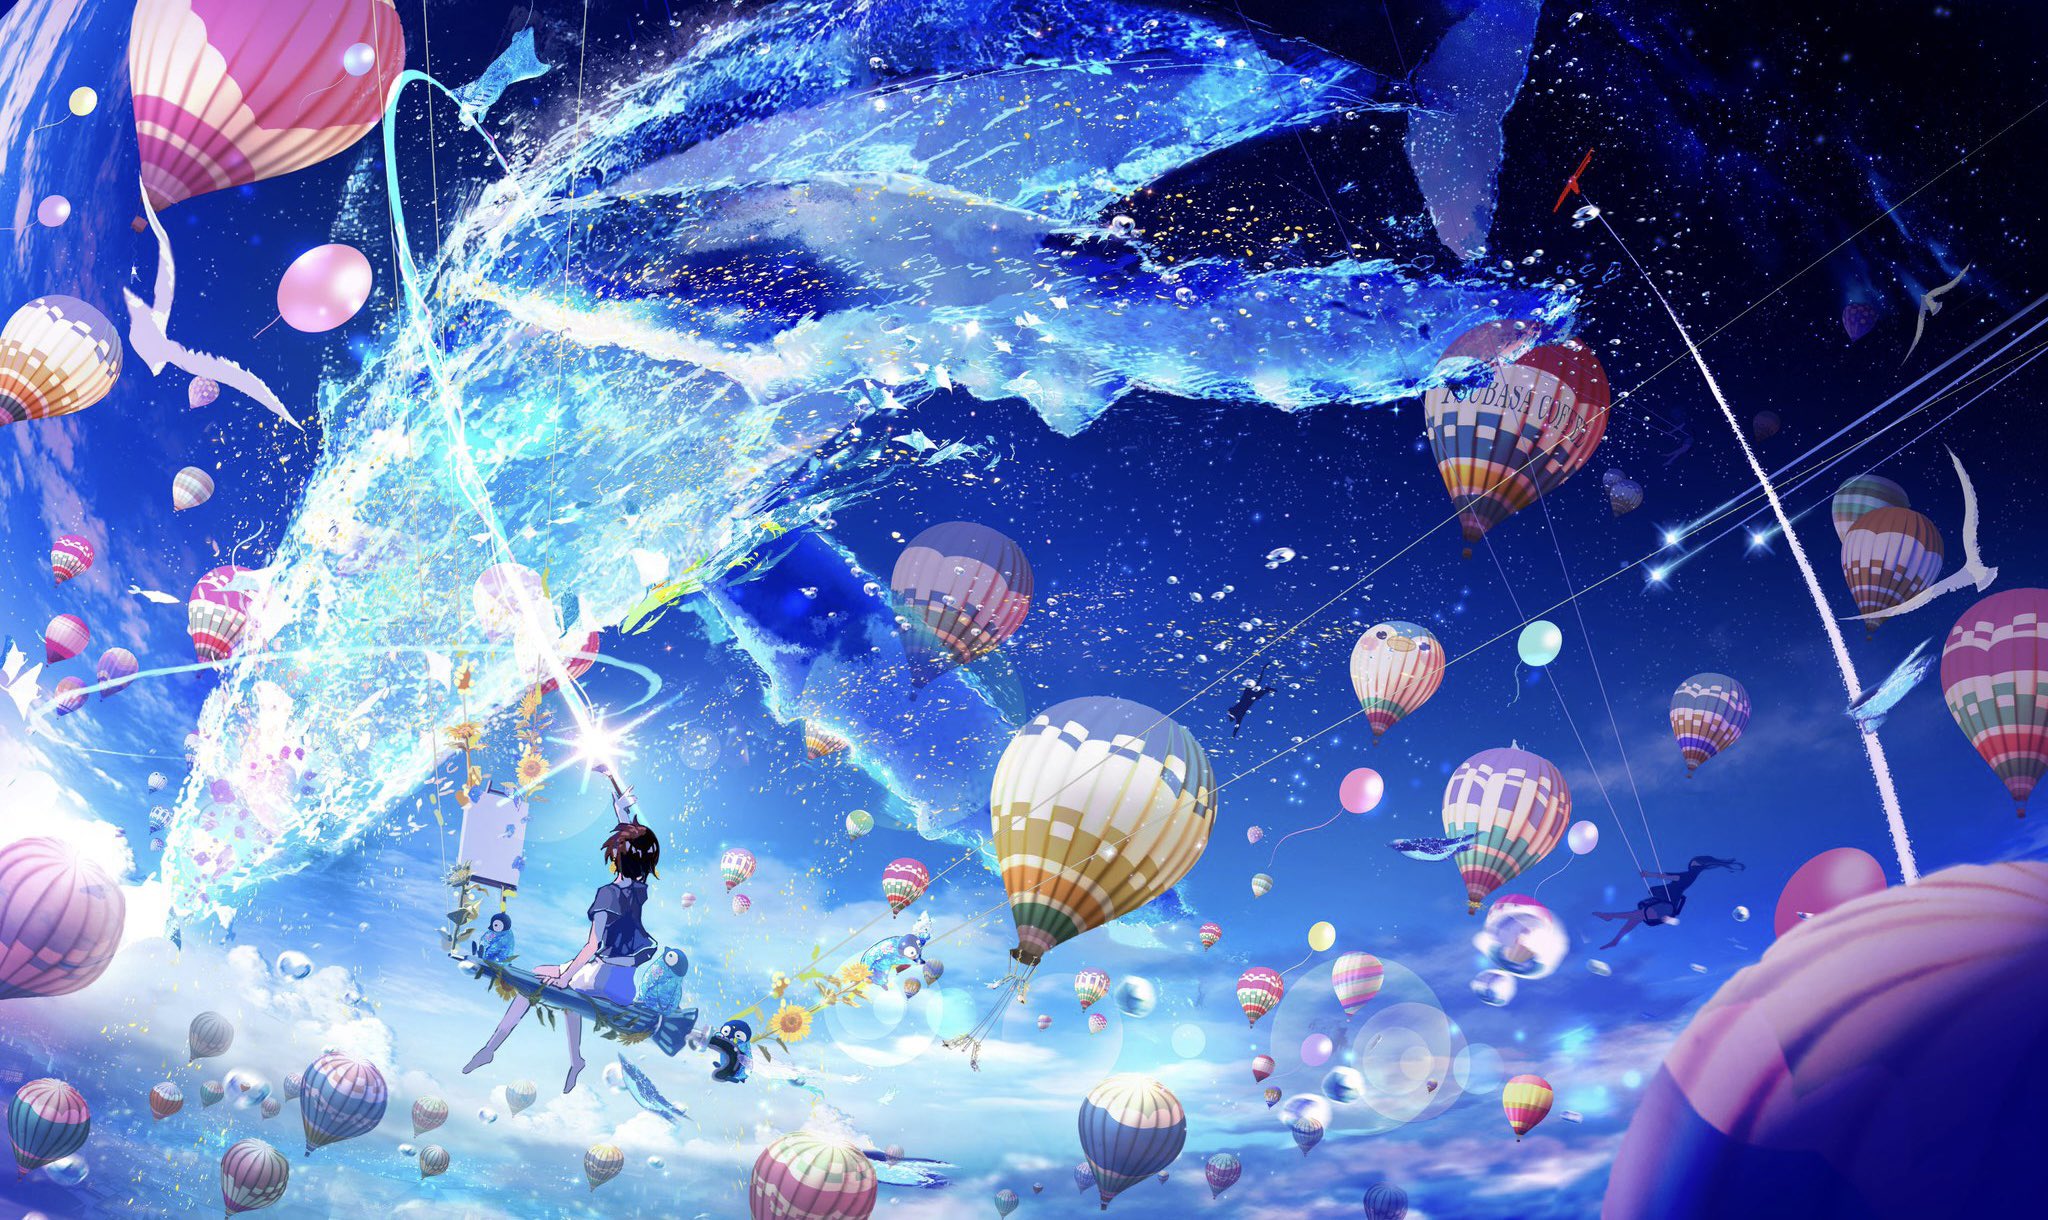 Anime Anime Girls Whale Hot Air Balloons Artwork Fish Birds Clouds Water Sky Animals Sitting Short H 2048x1220